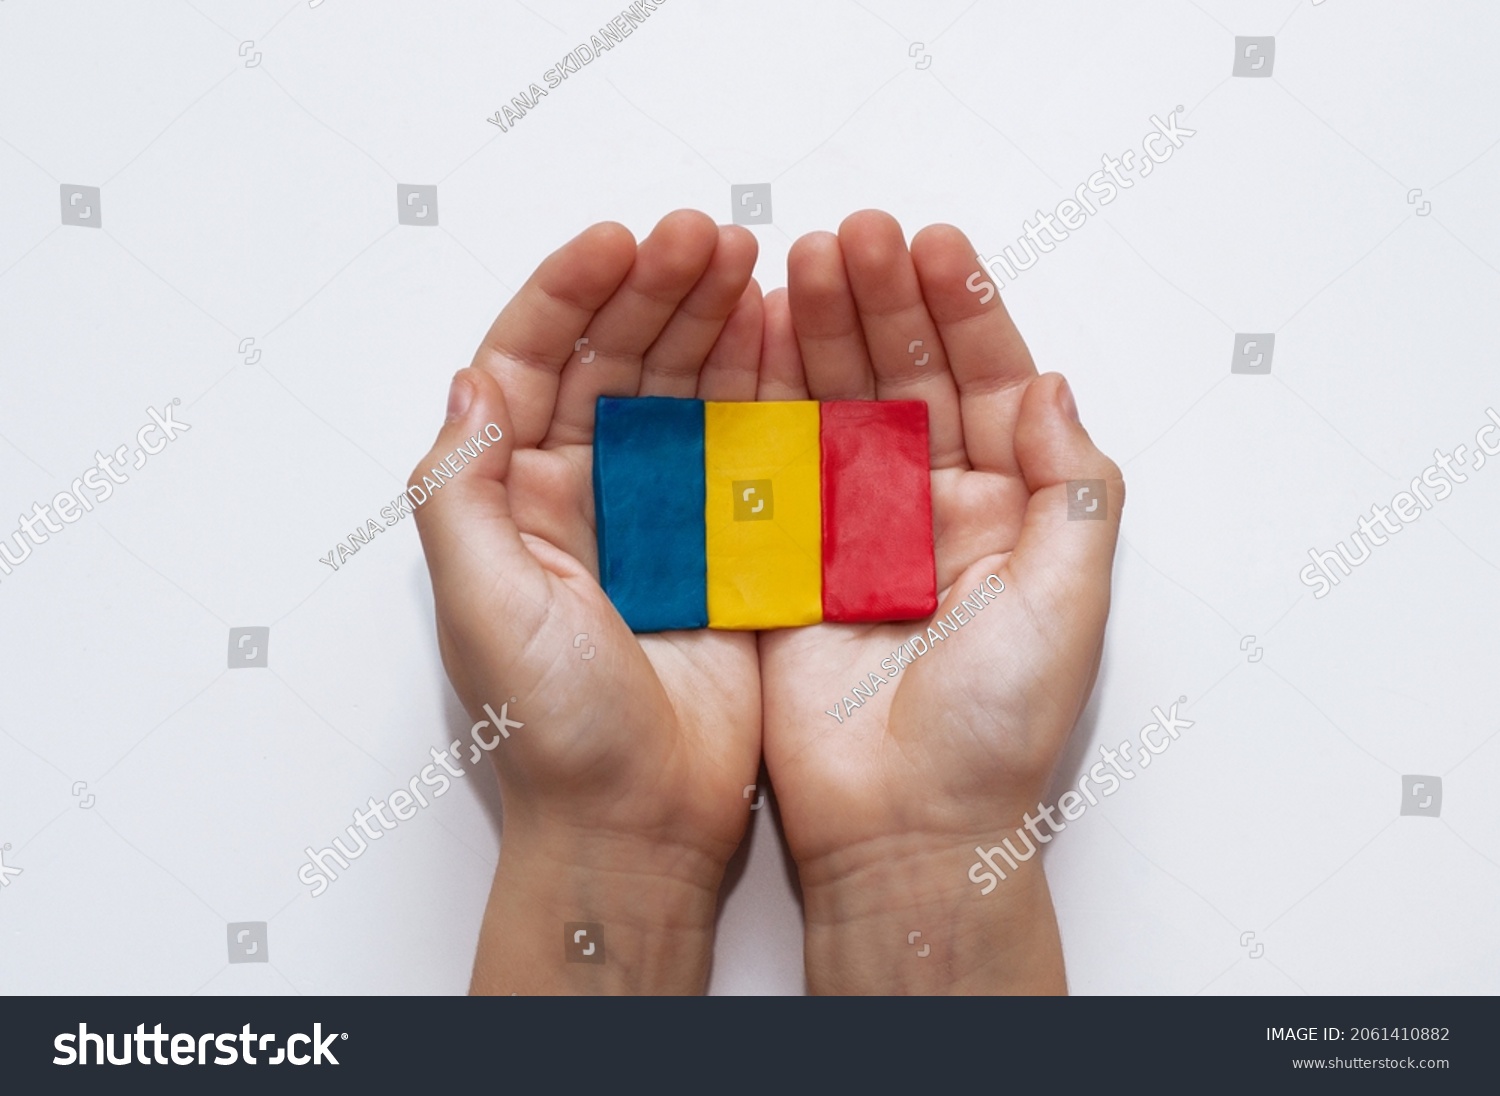 flag of Romania made of plasticine in the hands of a child on a white background #2061410882